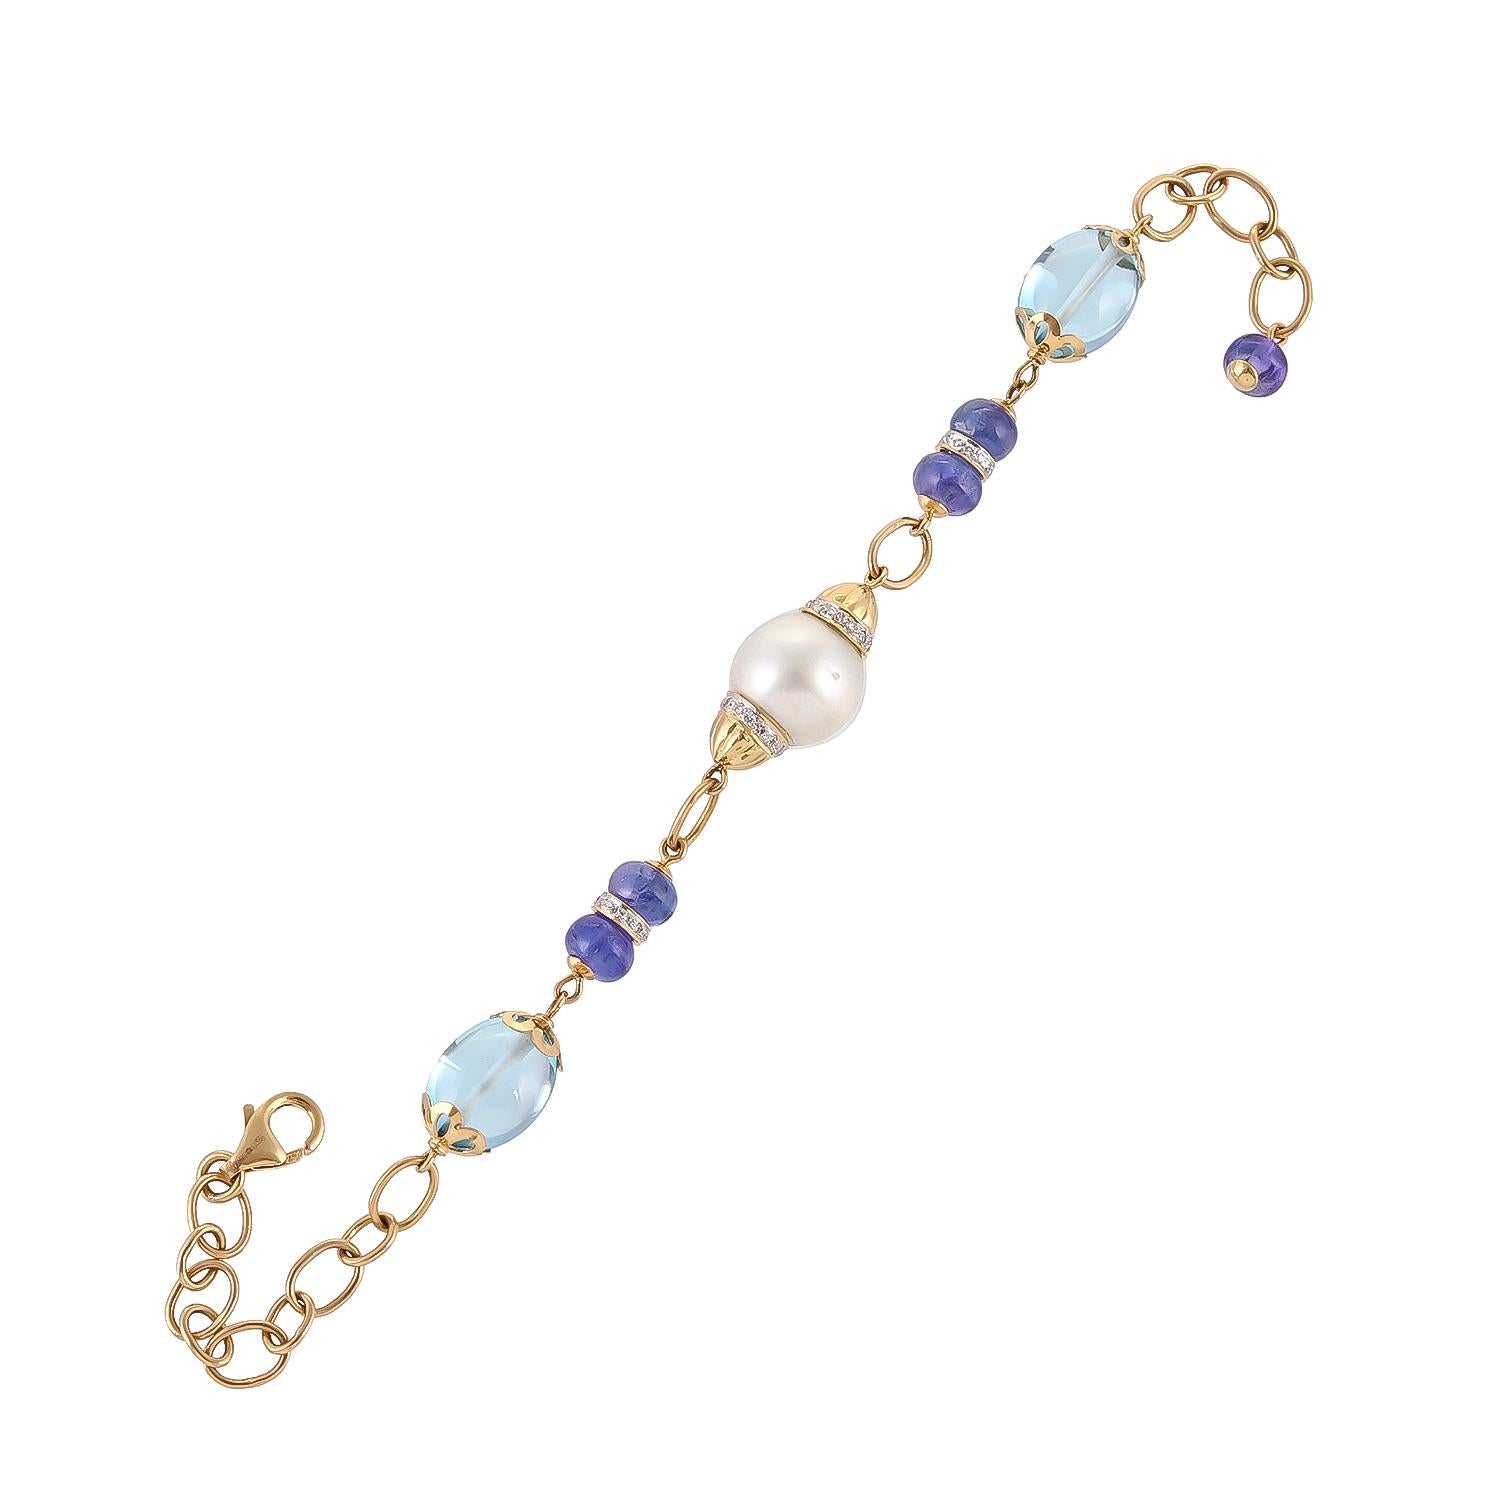 20.04ct blue topaz dumbles are played with 9.00ct tanzanite beads and further enhanced with 11.51ct white south sea pearls and 0.34ct diamonds in this 18kt gold bracelet.
Art of gifting: the Jewel is presented with 'Exquisite Fine Jewellery'